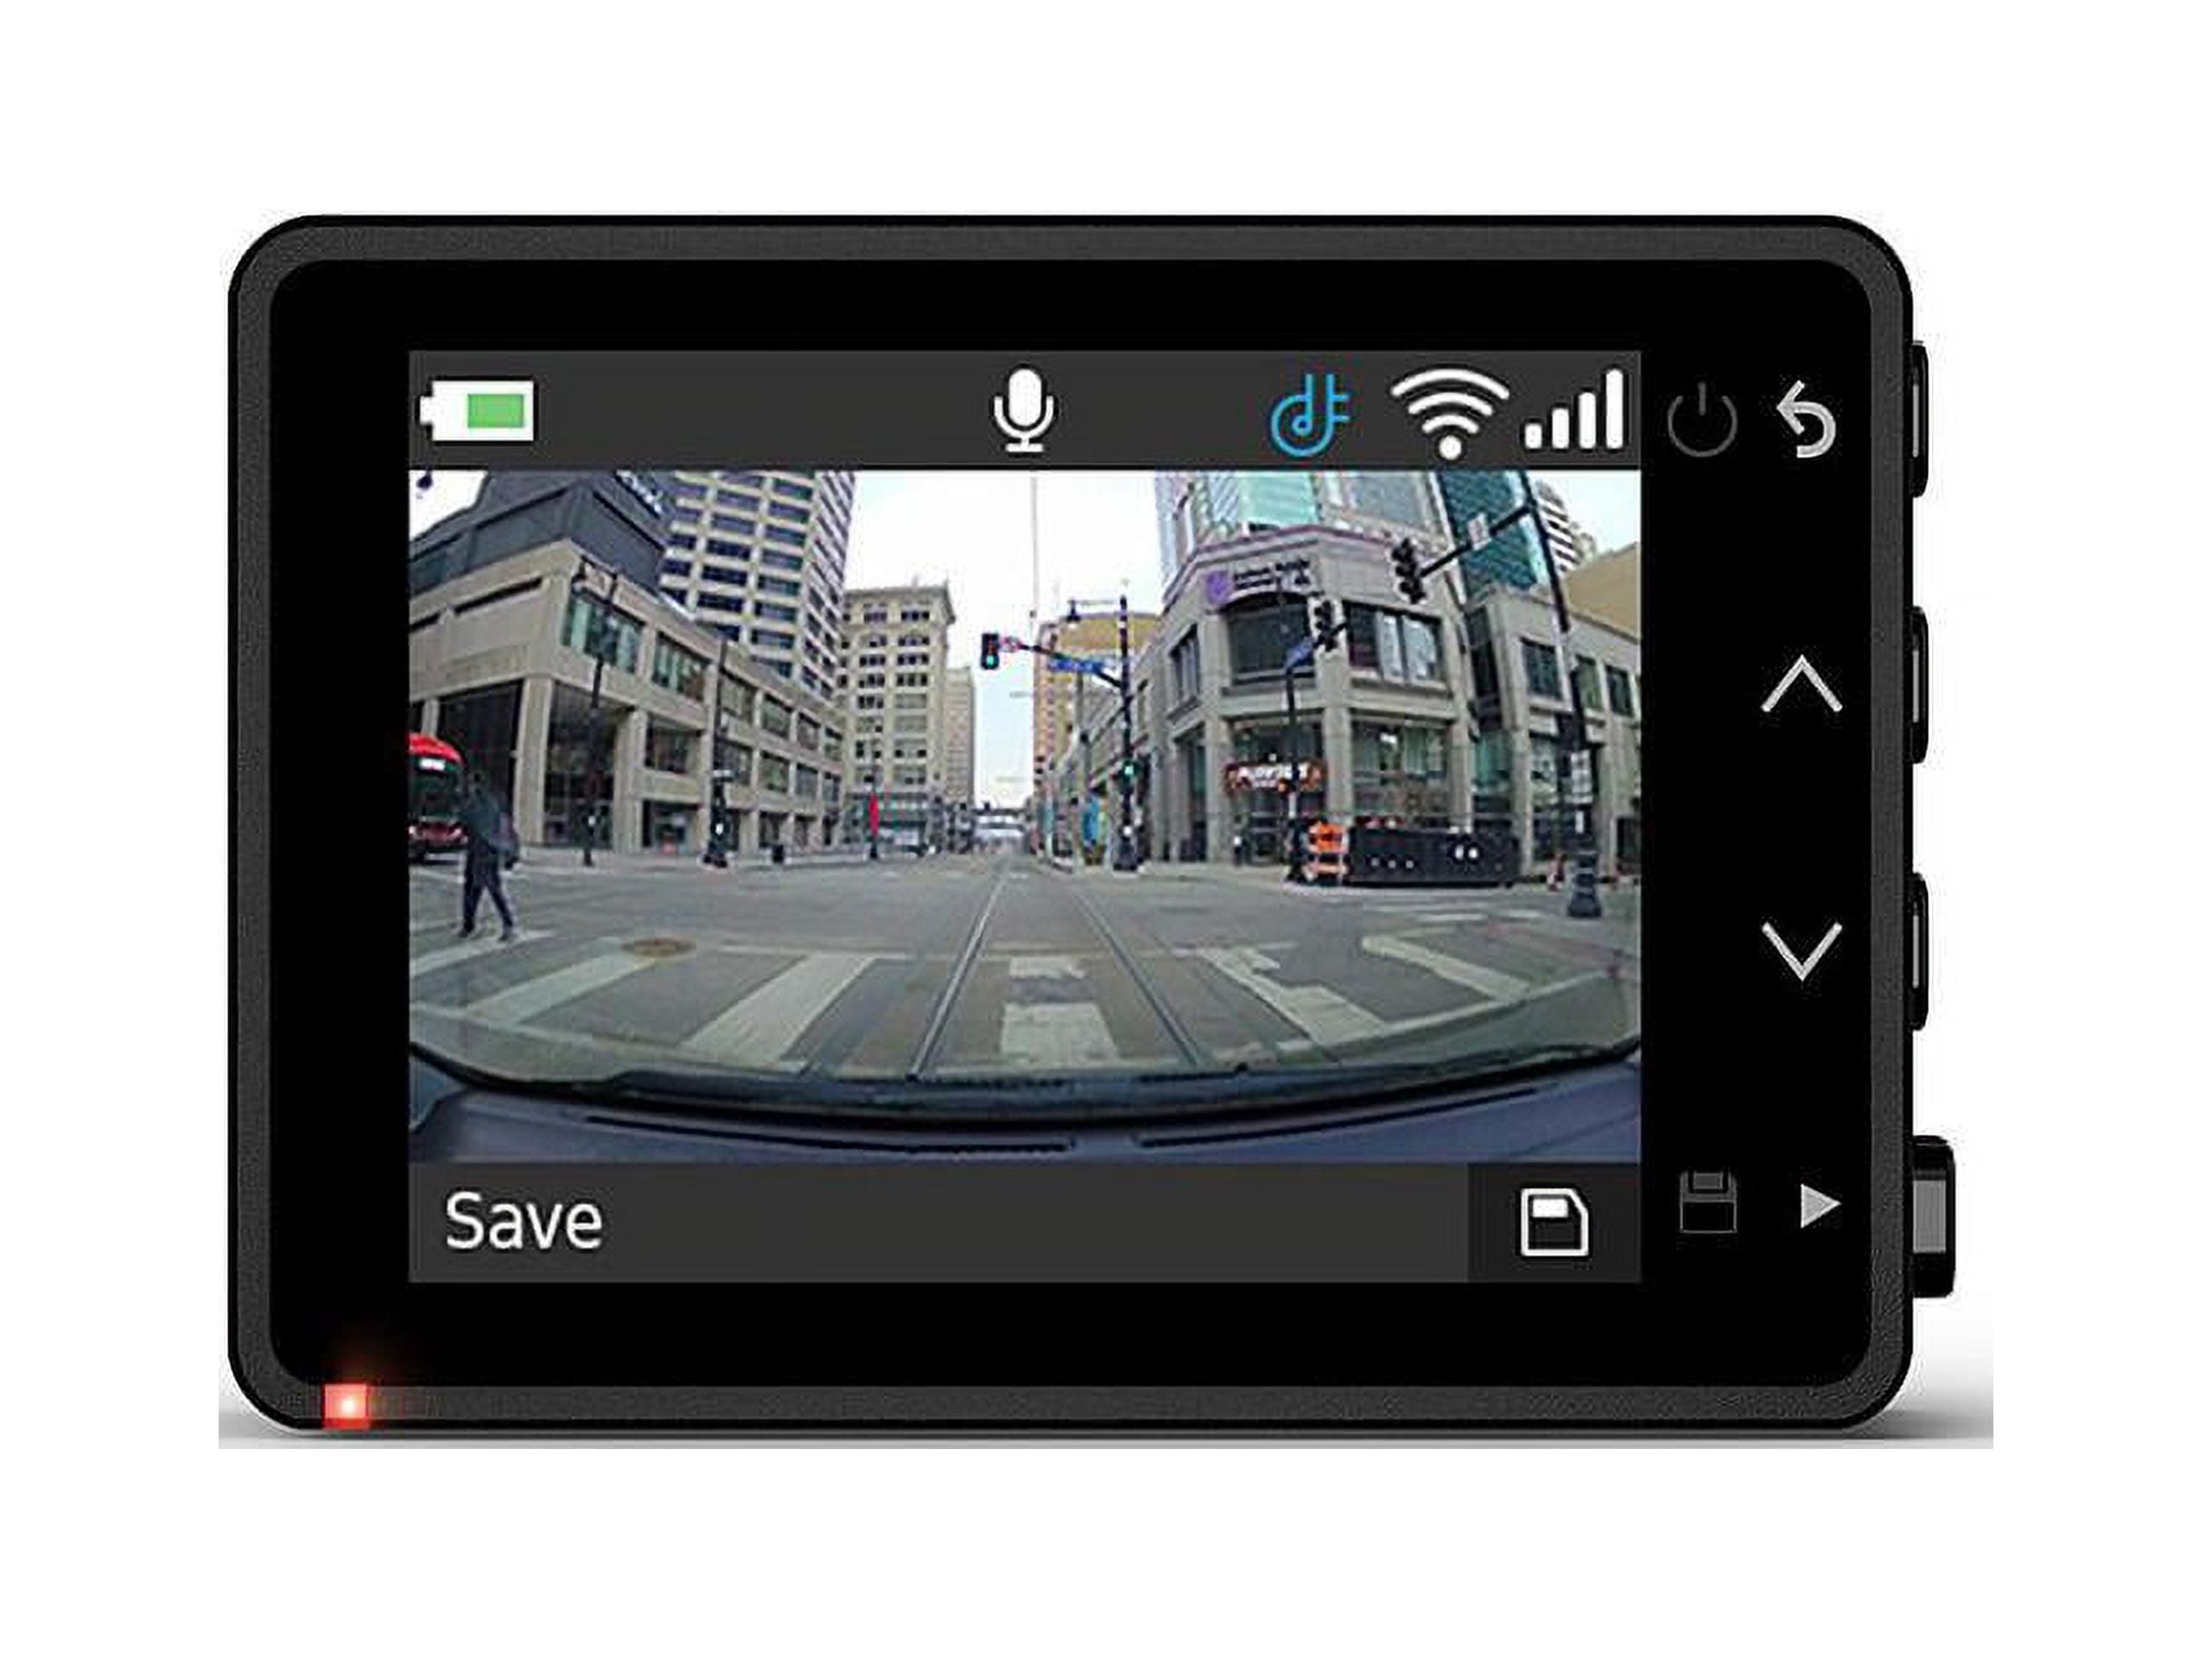 Has Garmin Released The Best Cloud Dash Cam On The Market? - The Dashcam  Store